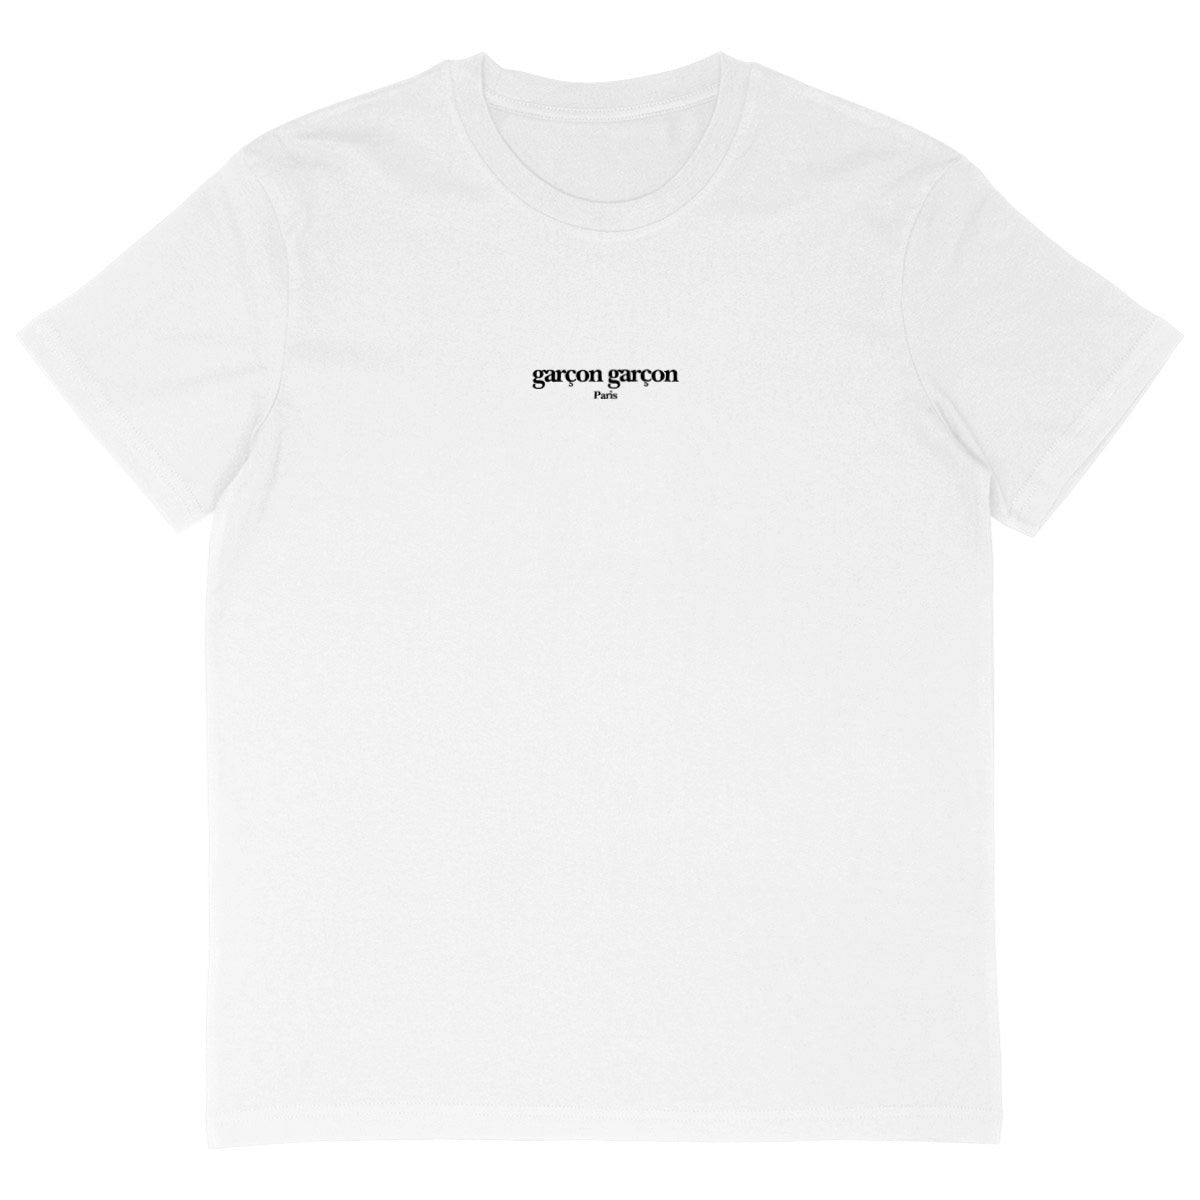 garçon garçon essentiel tee oversize WHITE. Dive into the essence of Parisian cool with this oversized tee. The subtle 'garçon garçon' signature whispers a chic narrative, offering a slice of the city's famed elegance. Perfect for those who speak style with simplicity.